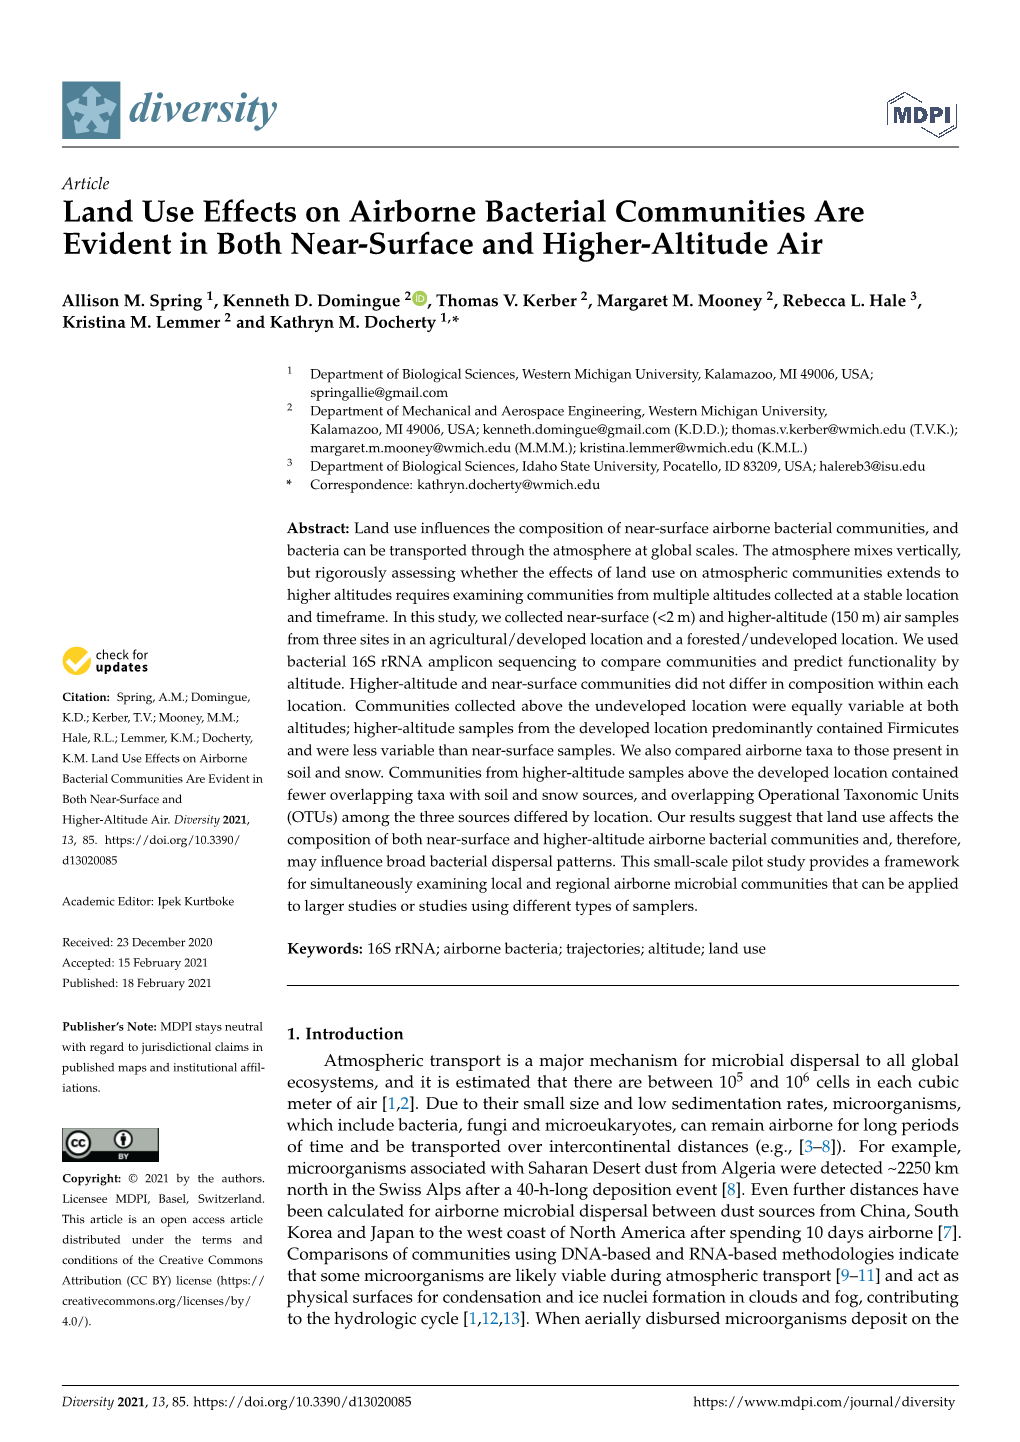 Land Use Effects on Airborne Bacterial Communities Are Evident in Both Near-Surface and Higher-Altitude Air